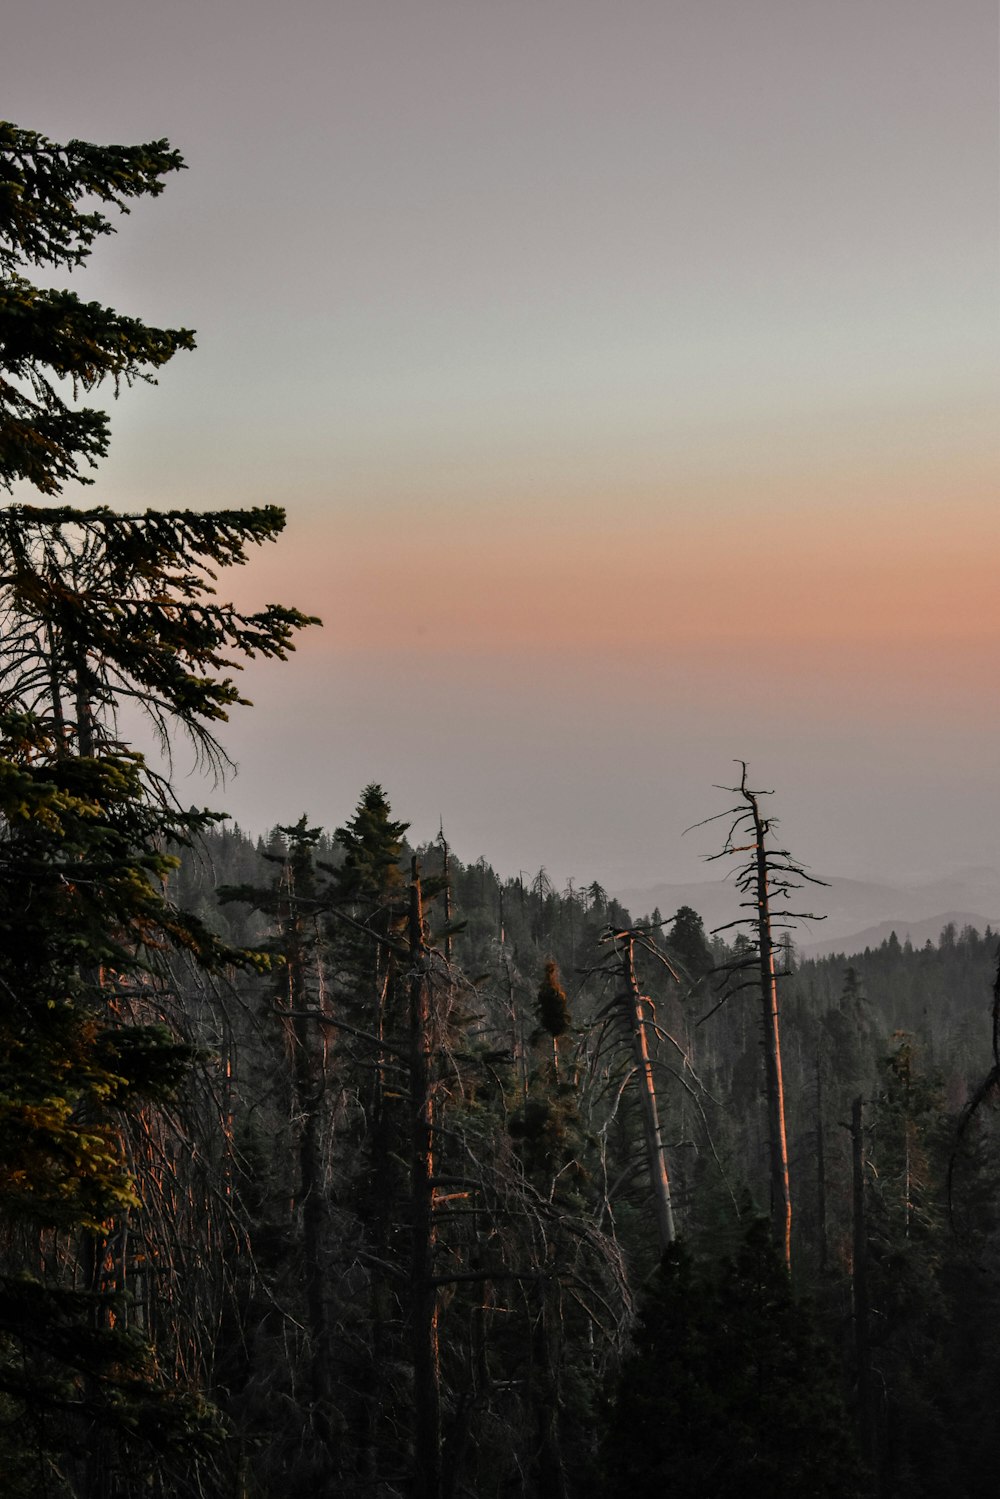 the sun is setting in the distance over a forest